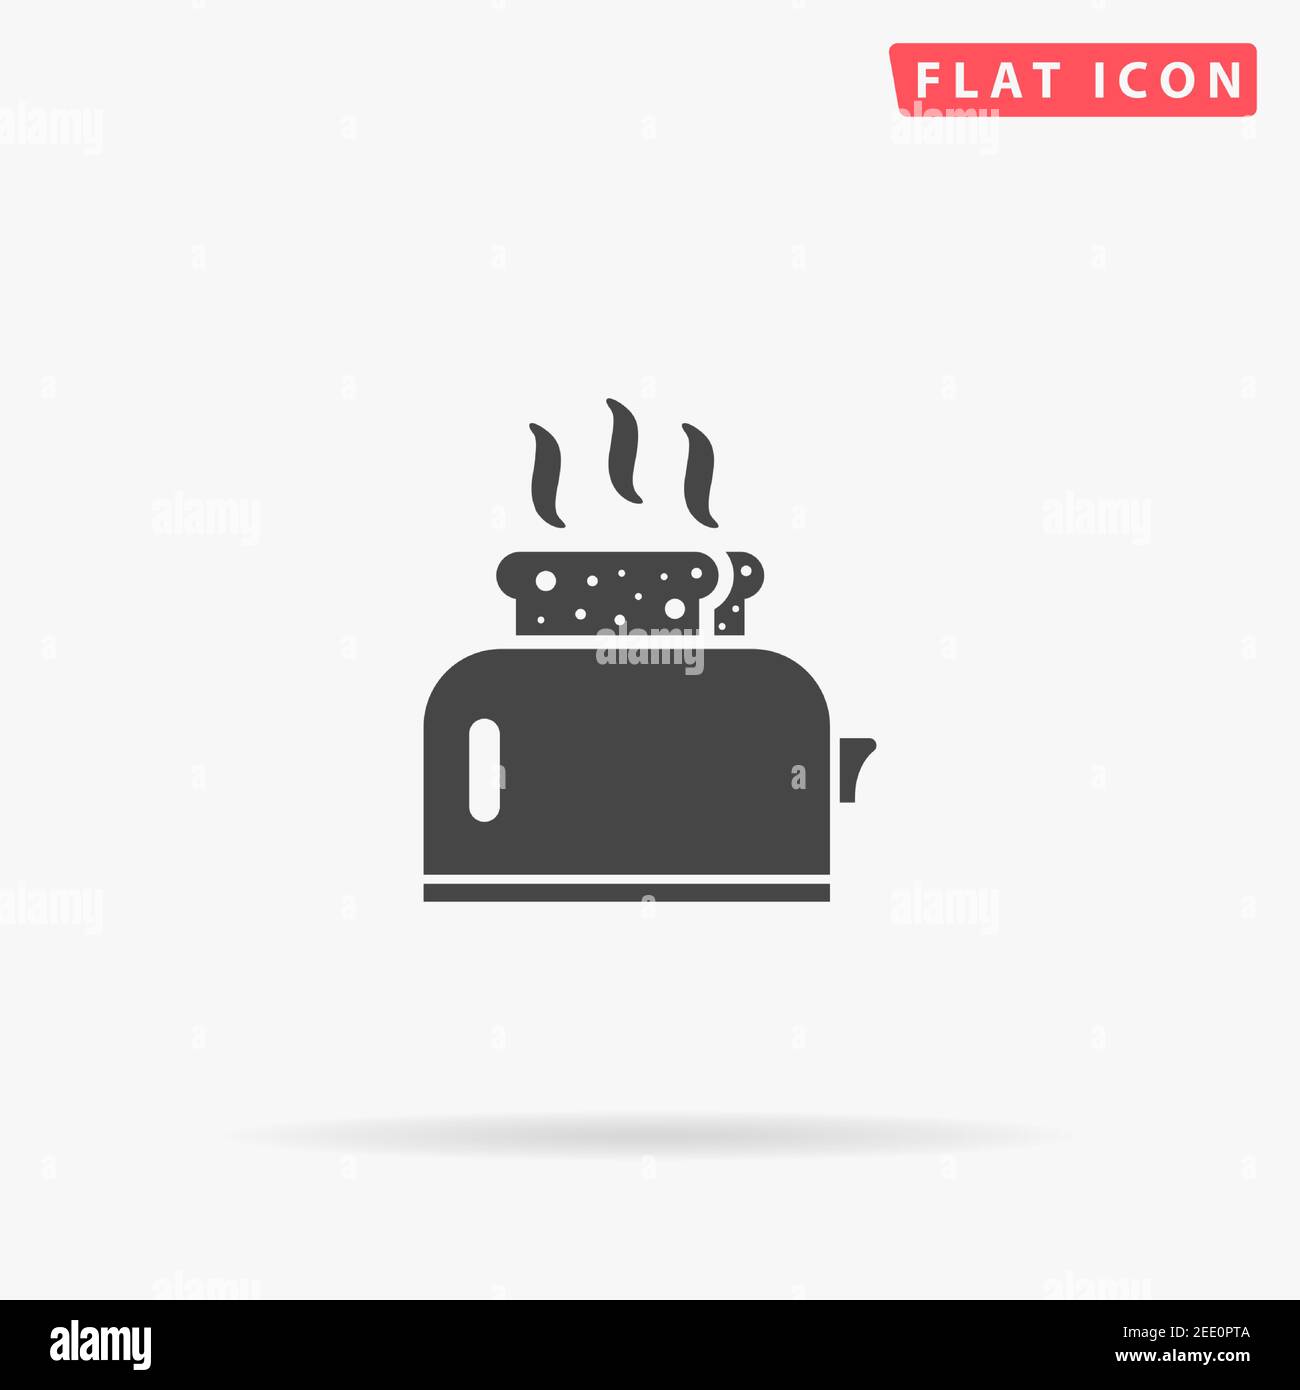 Toaster flat vector icon. Hand drawn style design illustrations. Stock Vector